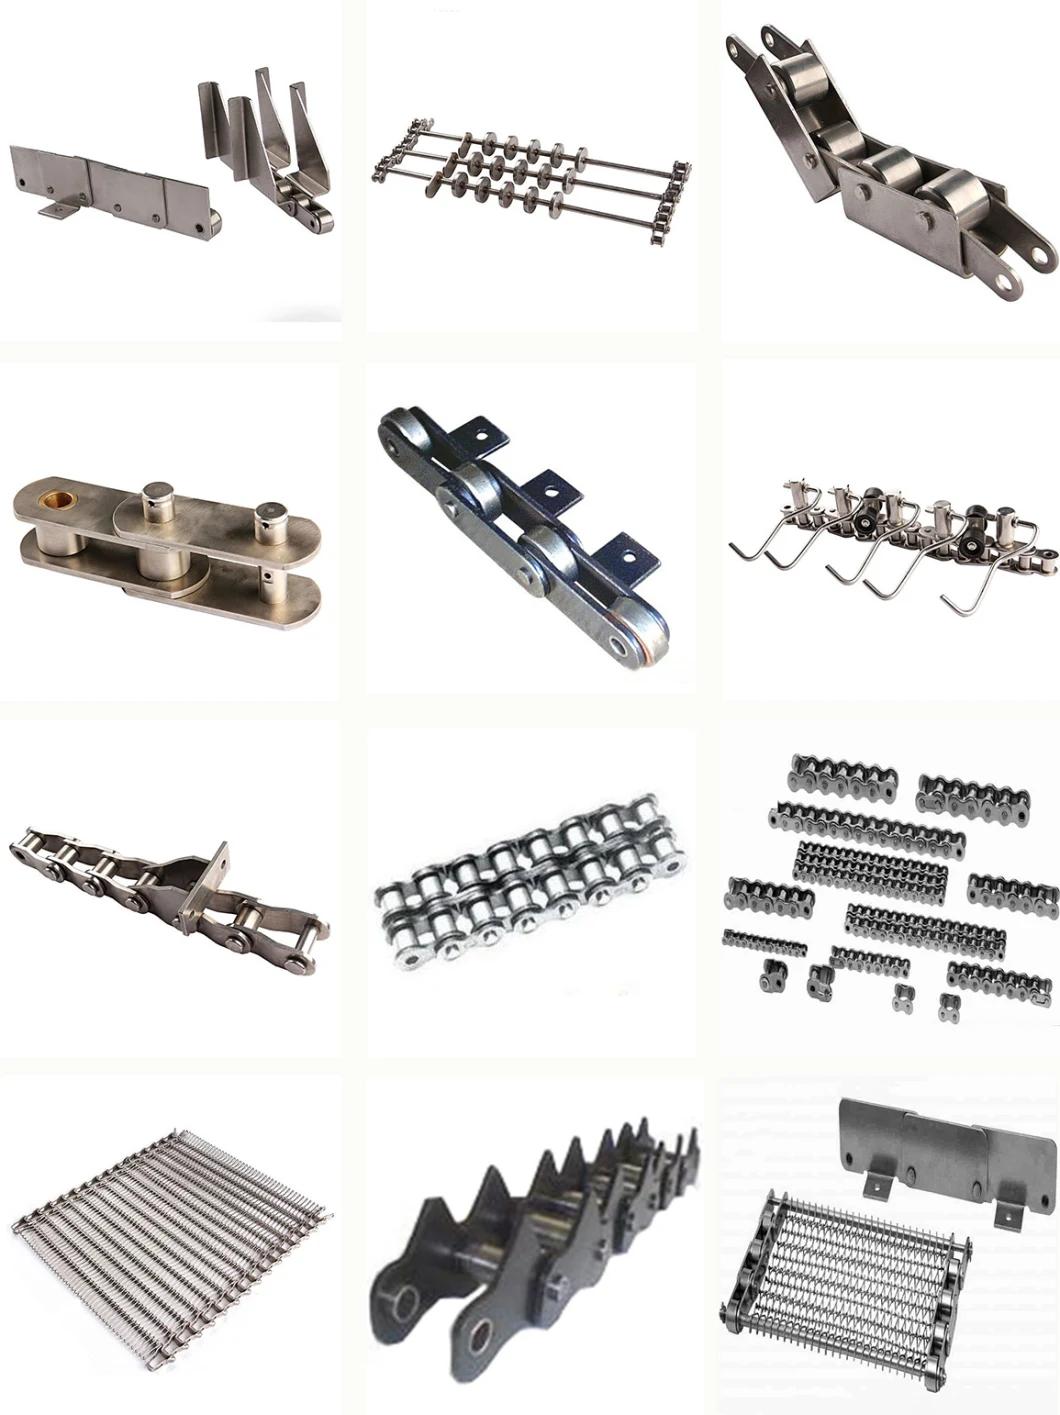 Experienced Stainless Steel Mt Series Conveyor Chain China Manufacturer